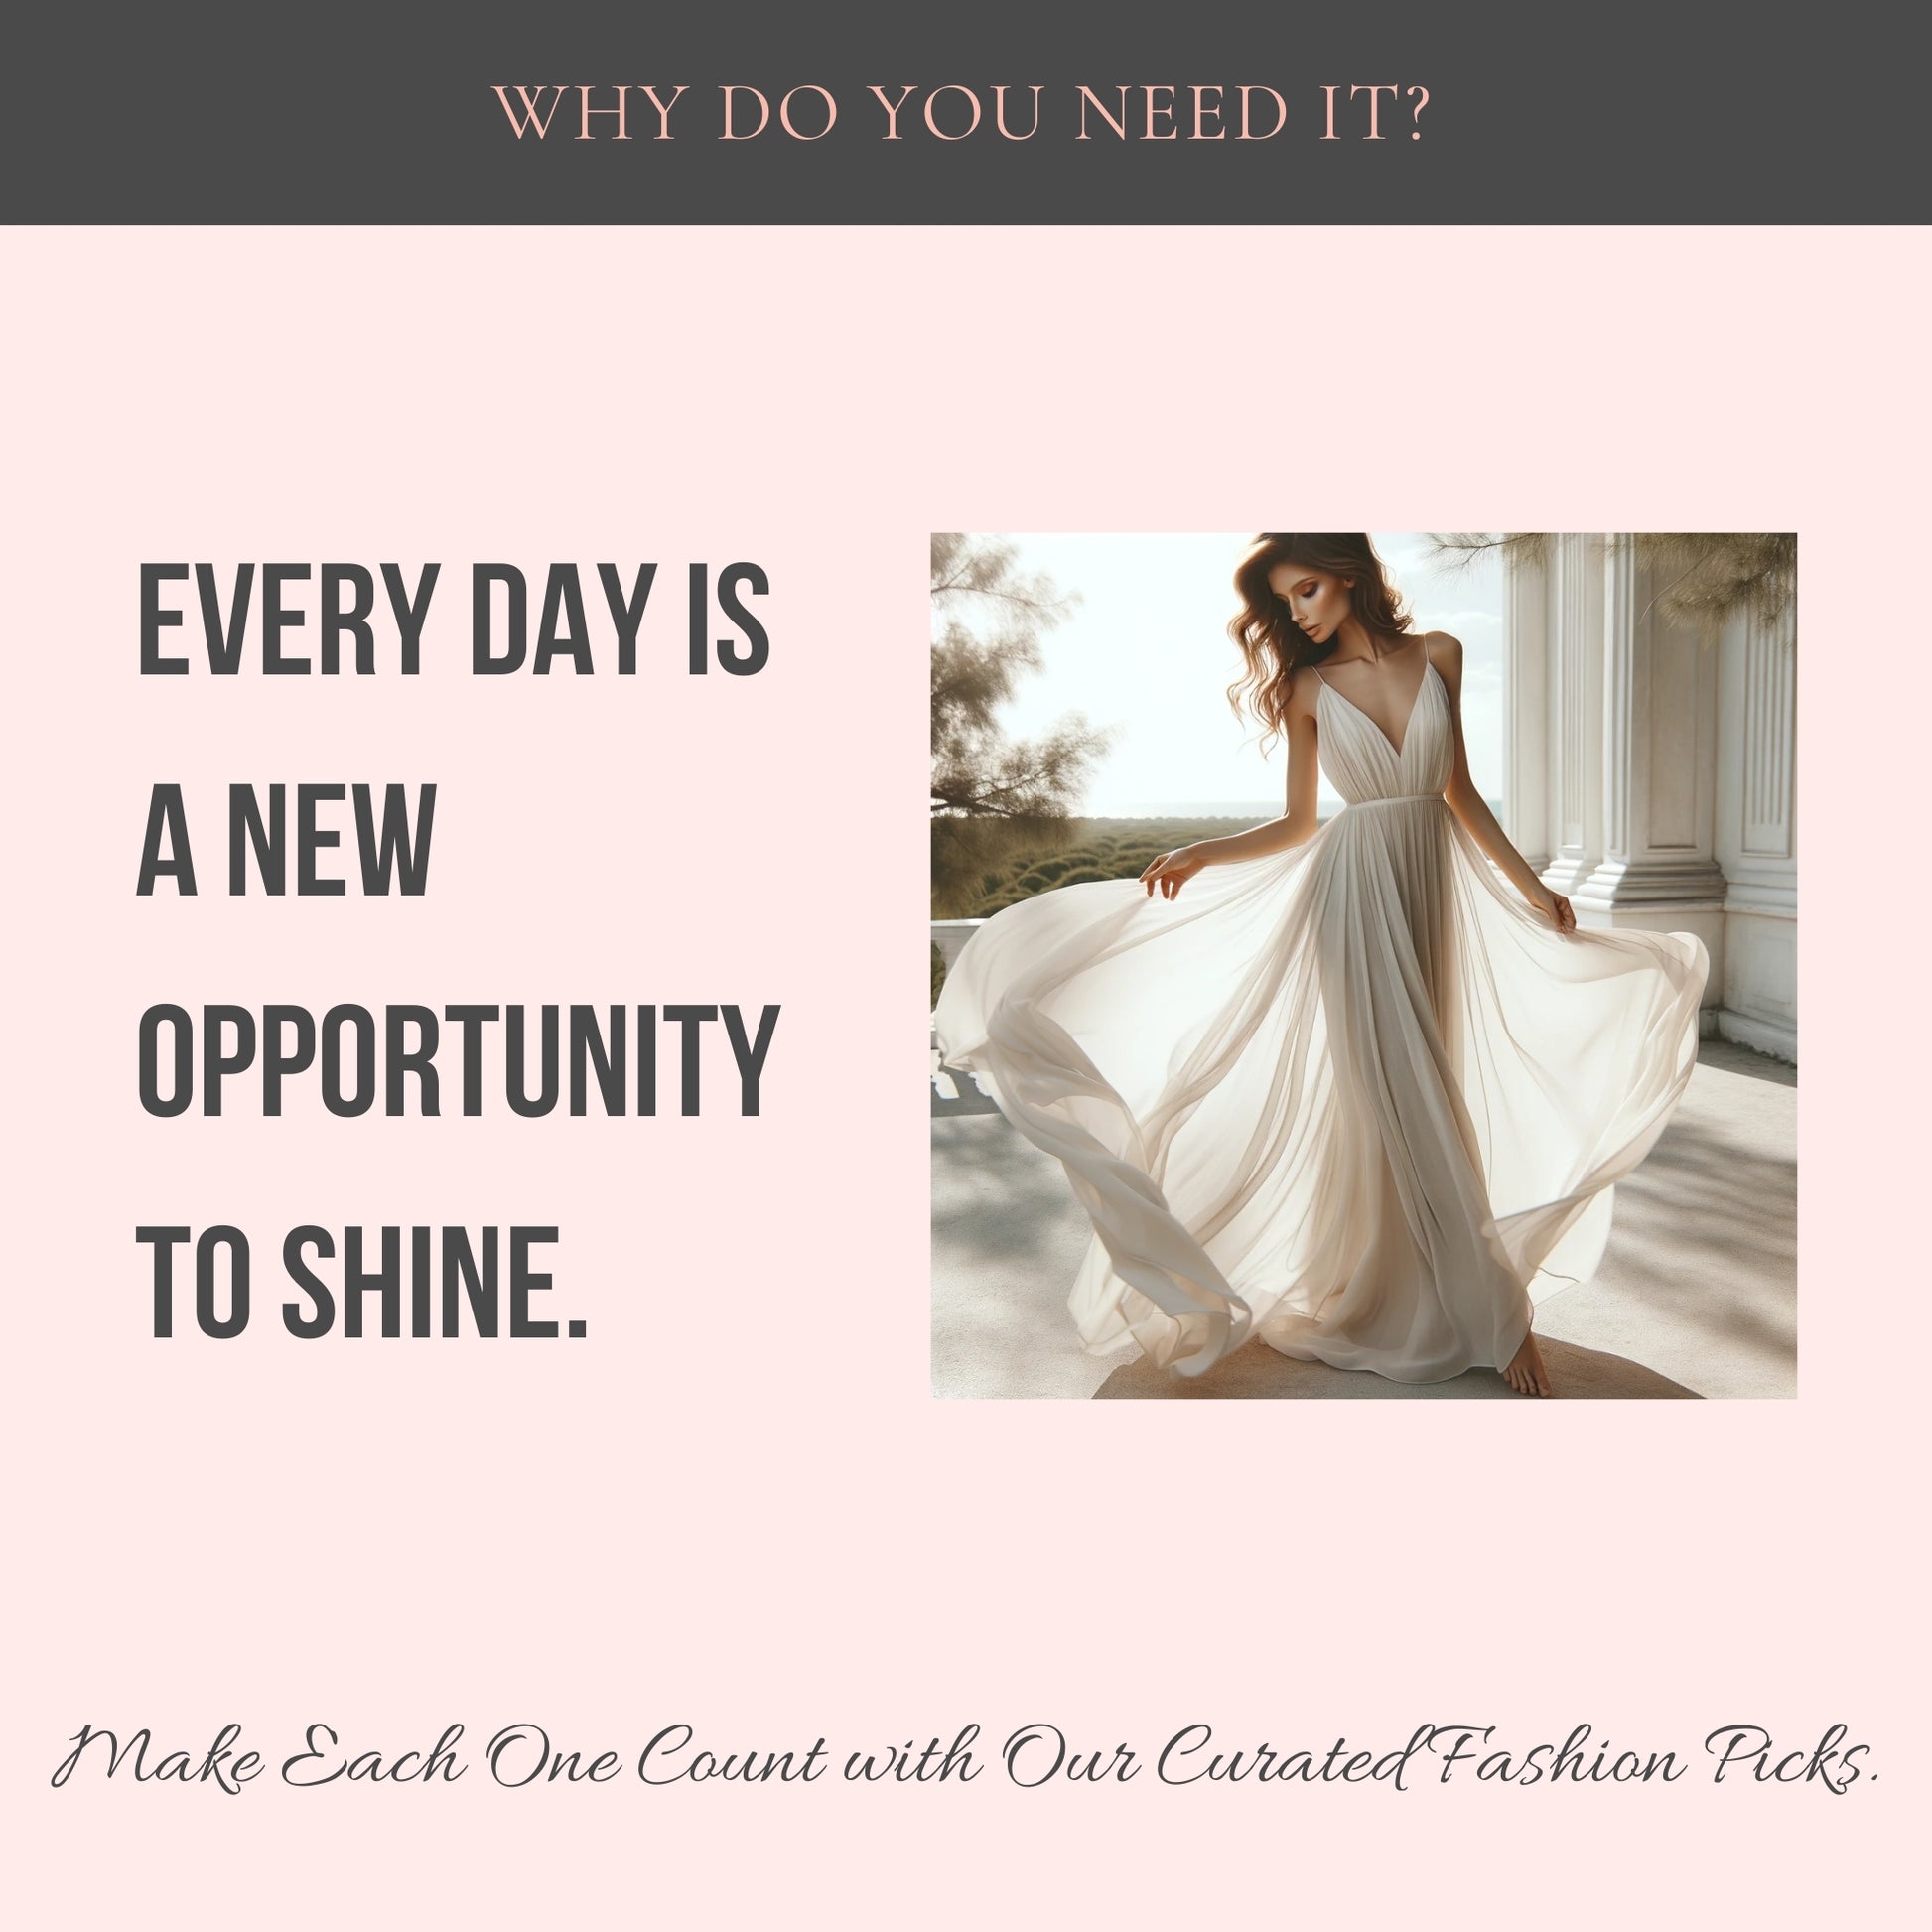 Top center: Why do you need it? Middle Center: Every Day is a new opportunity to shine. A picture of an elegant woman wearing a white long dress. Bottom center: Make each one count with our curated fashion picks.